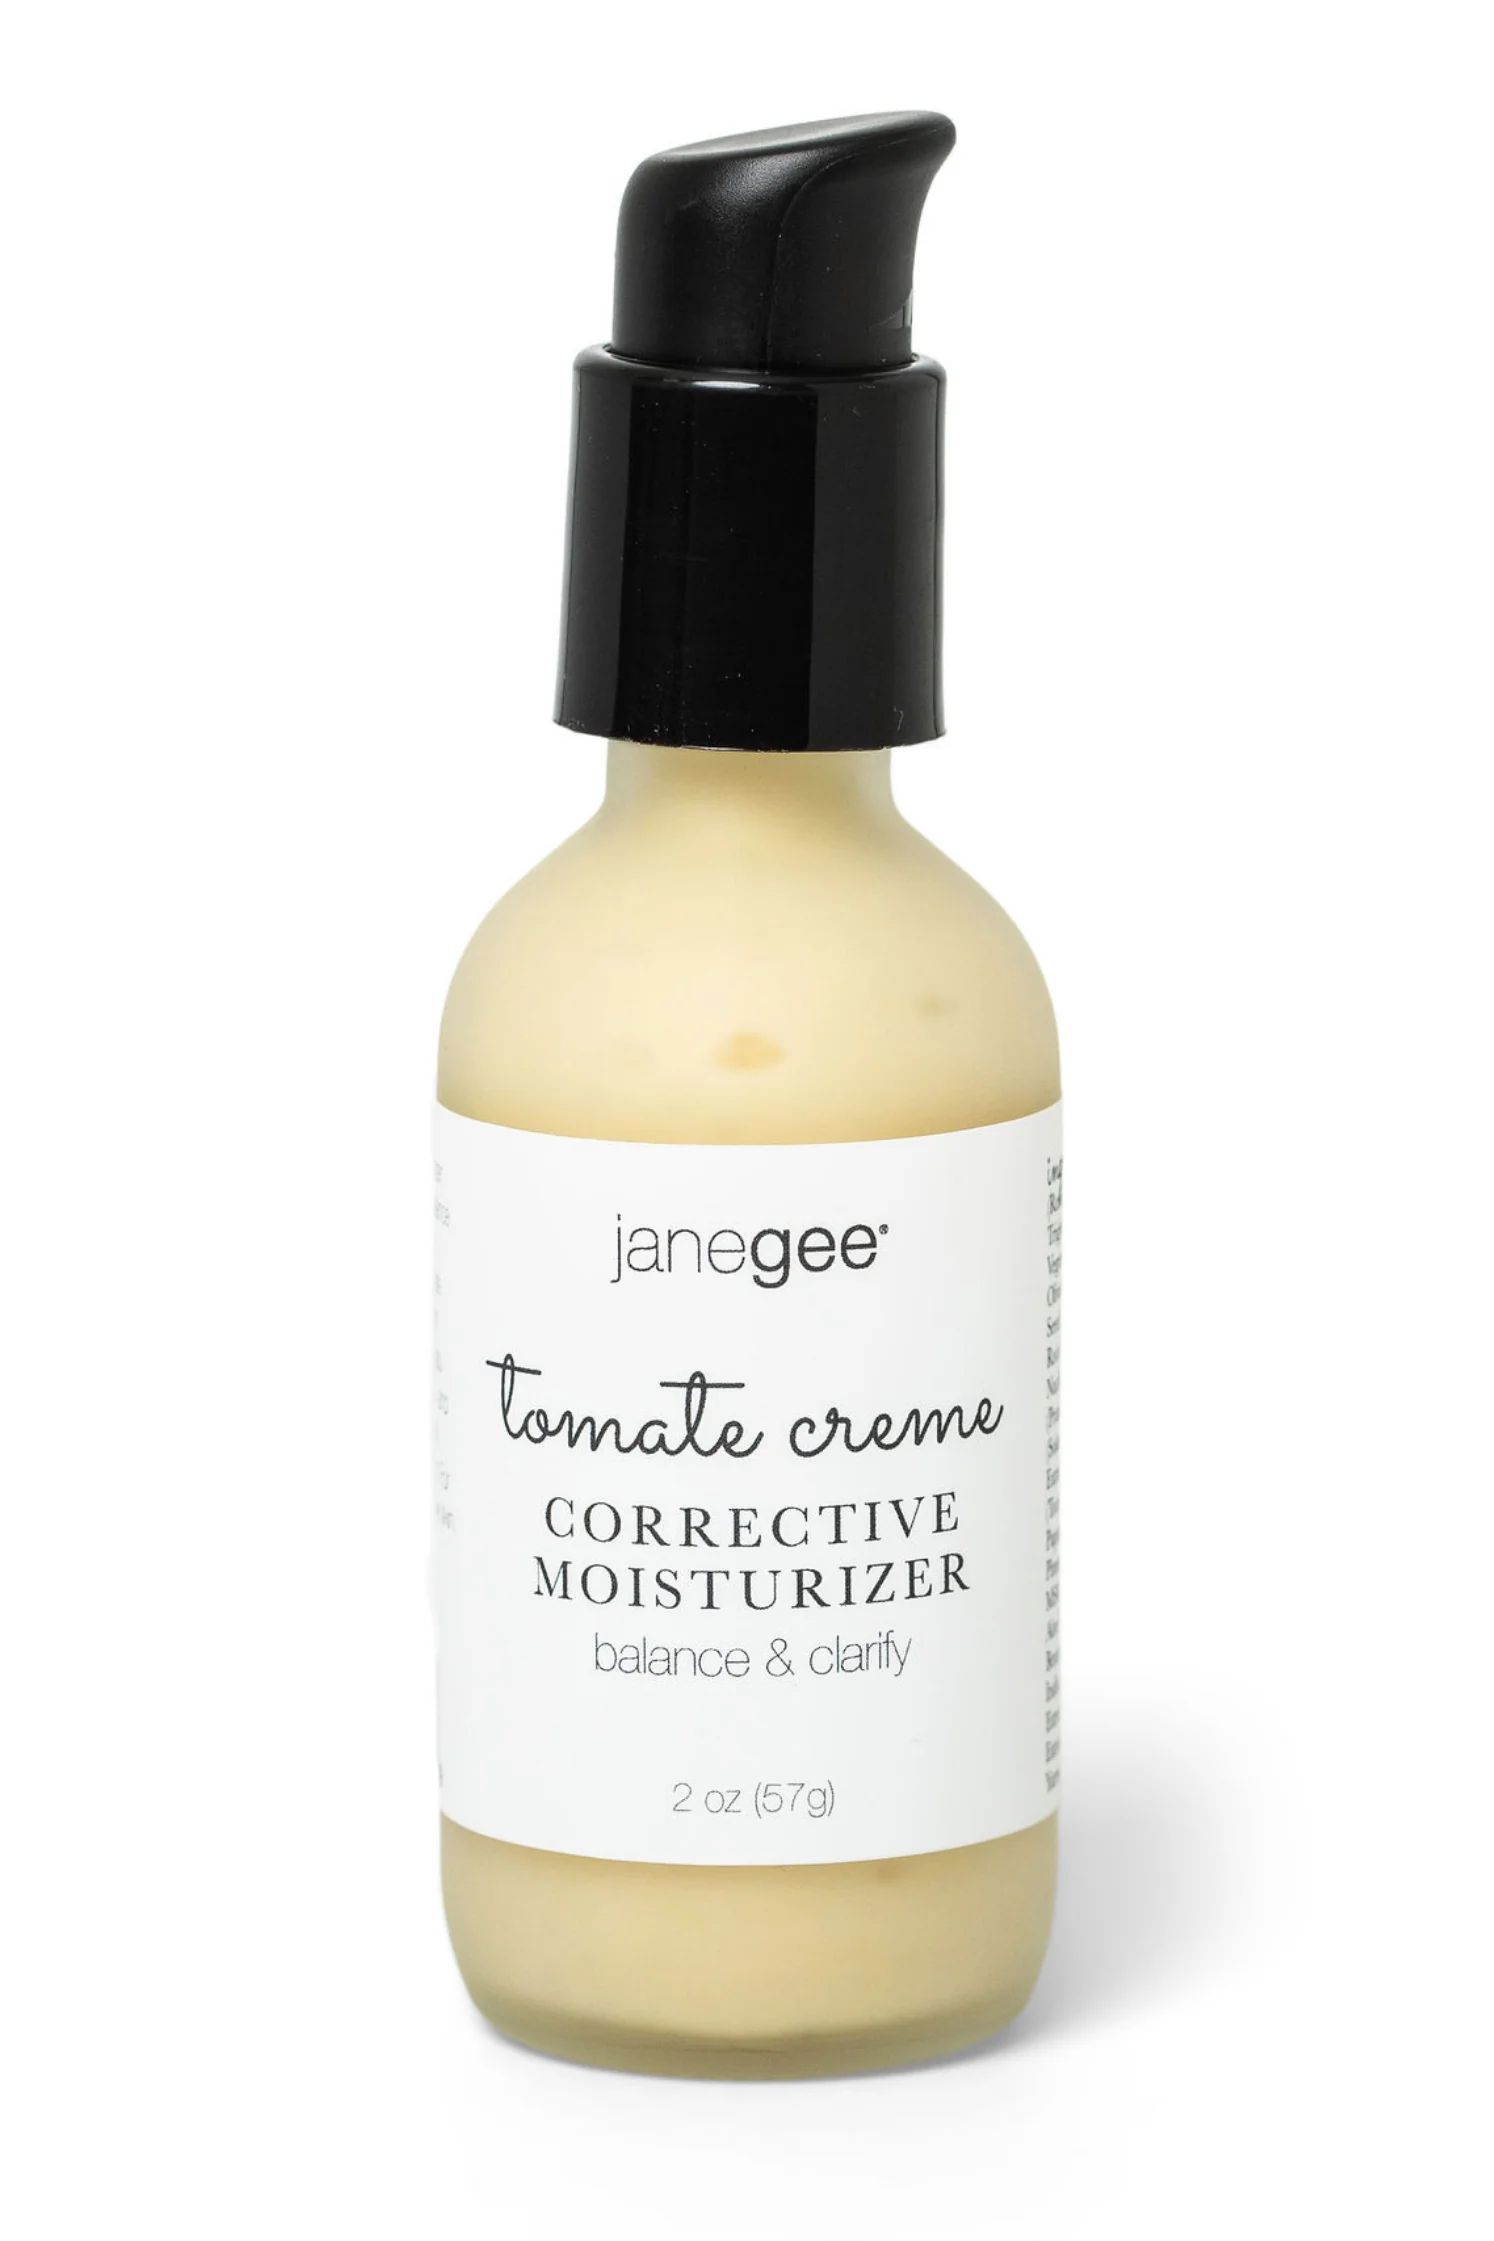 janegee Tomate Creme | janegee